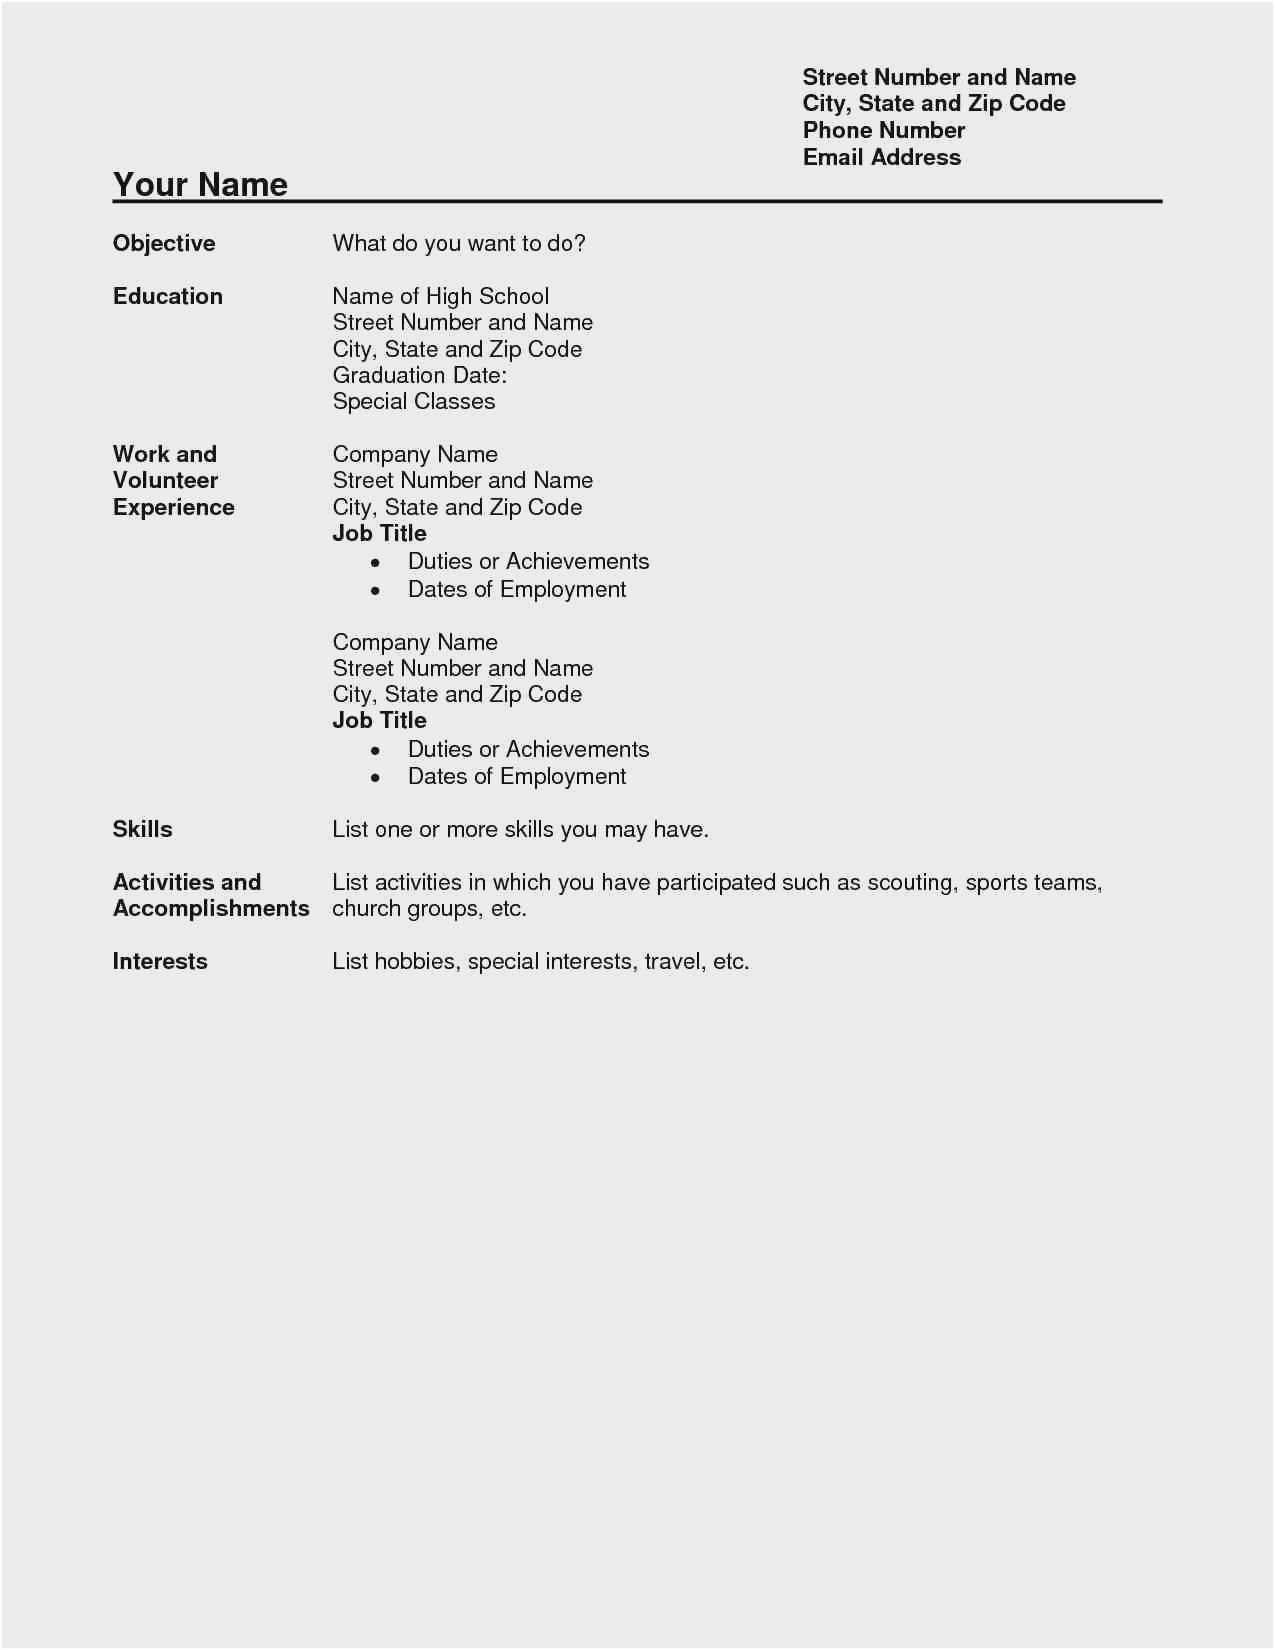 resume for someone with no work experience